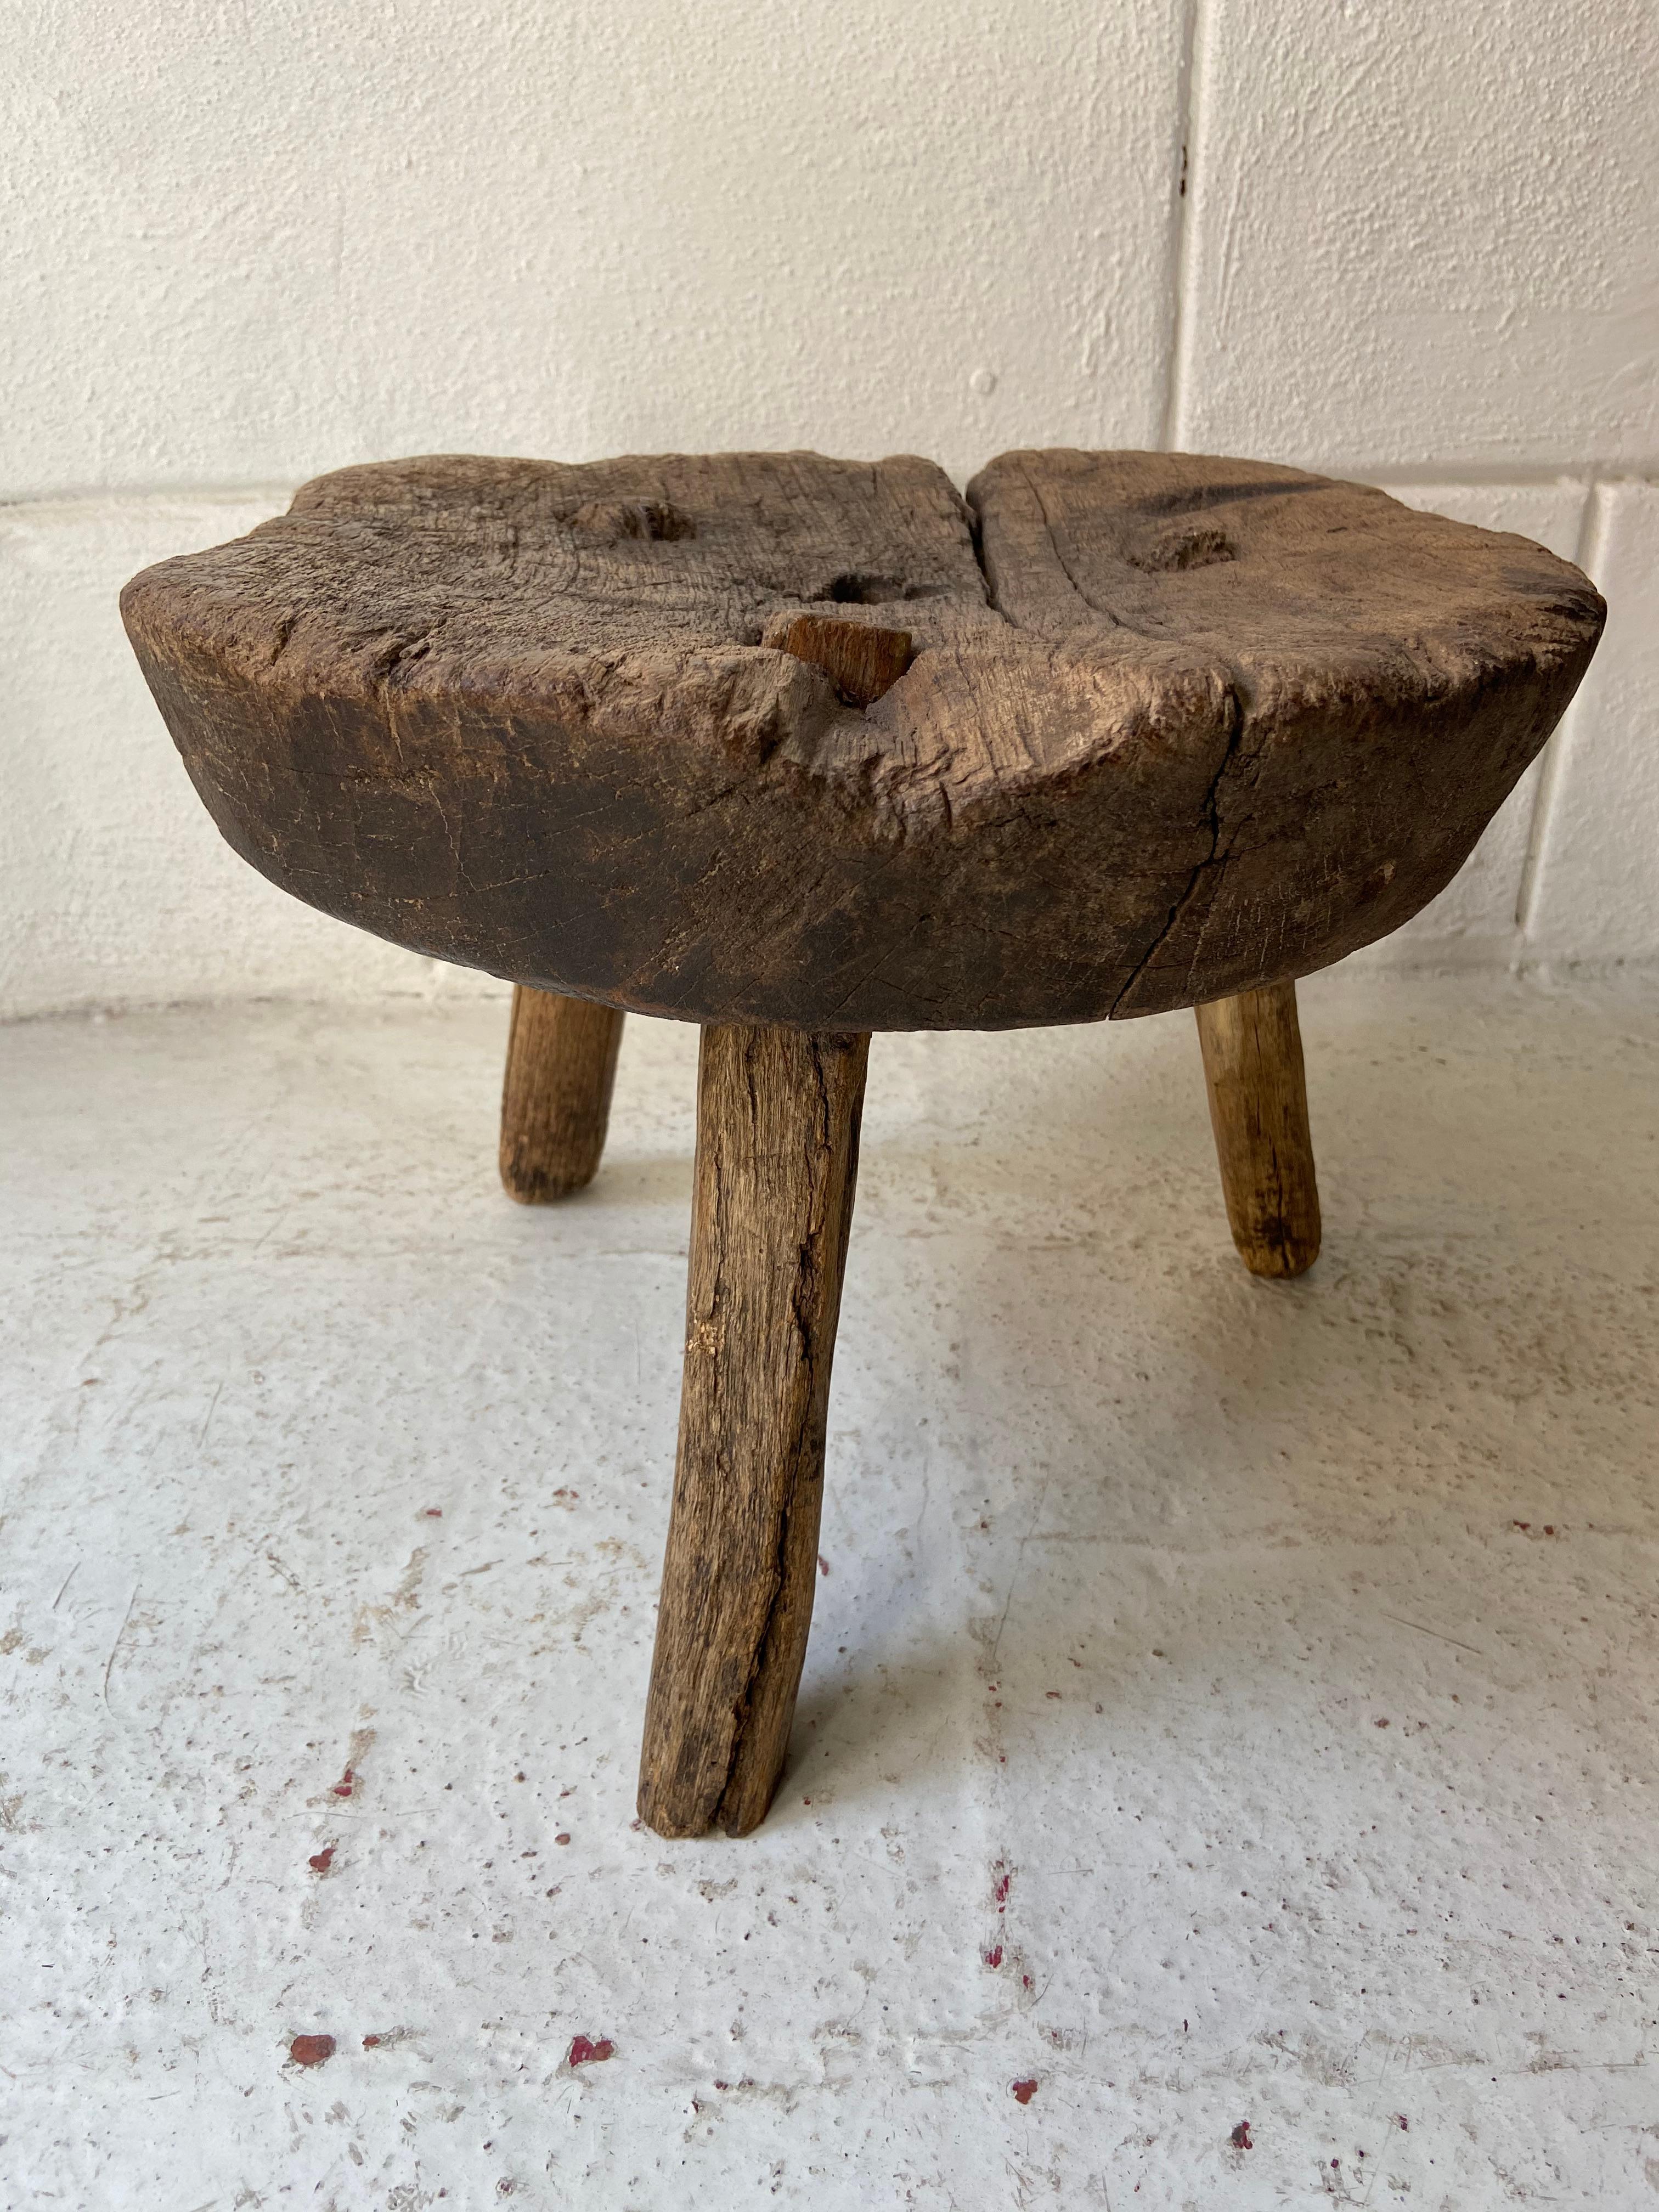 Mexican Antique Hardwood Stool from Guanajuato, Mexico